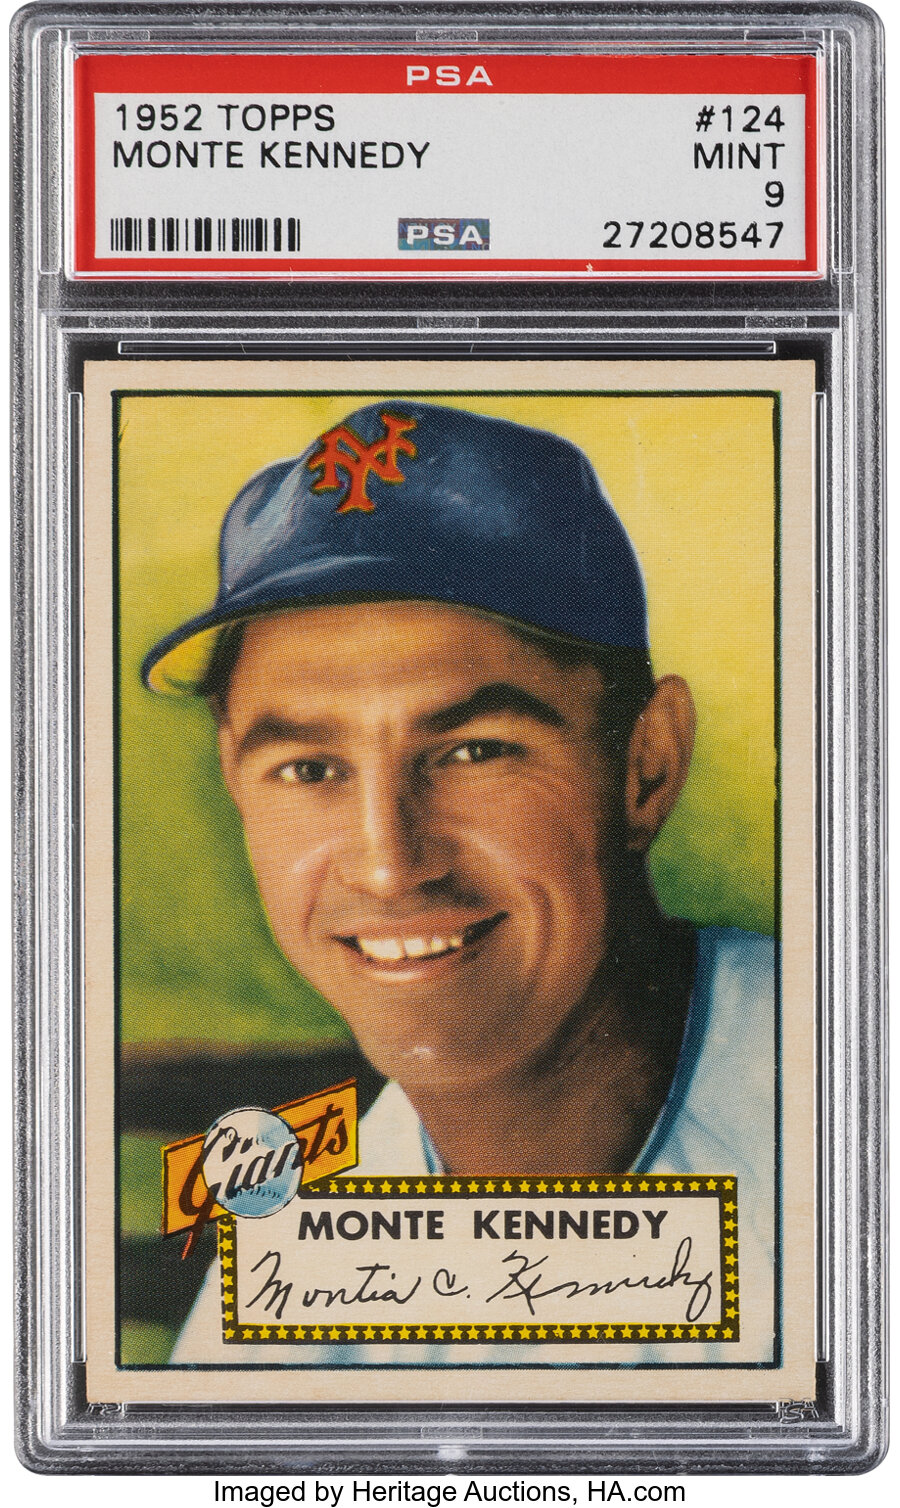 1952 Topps Monte Kennedy #124 PSA Mint 9 - None Higher